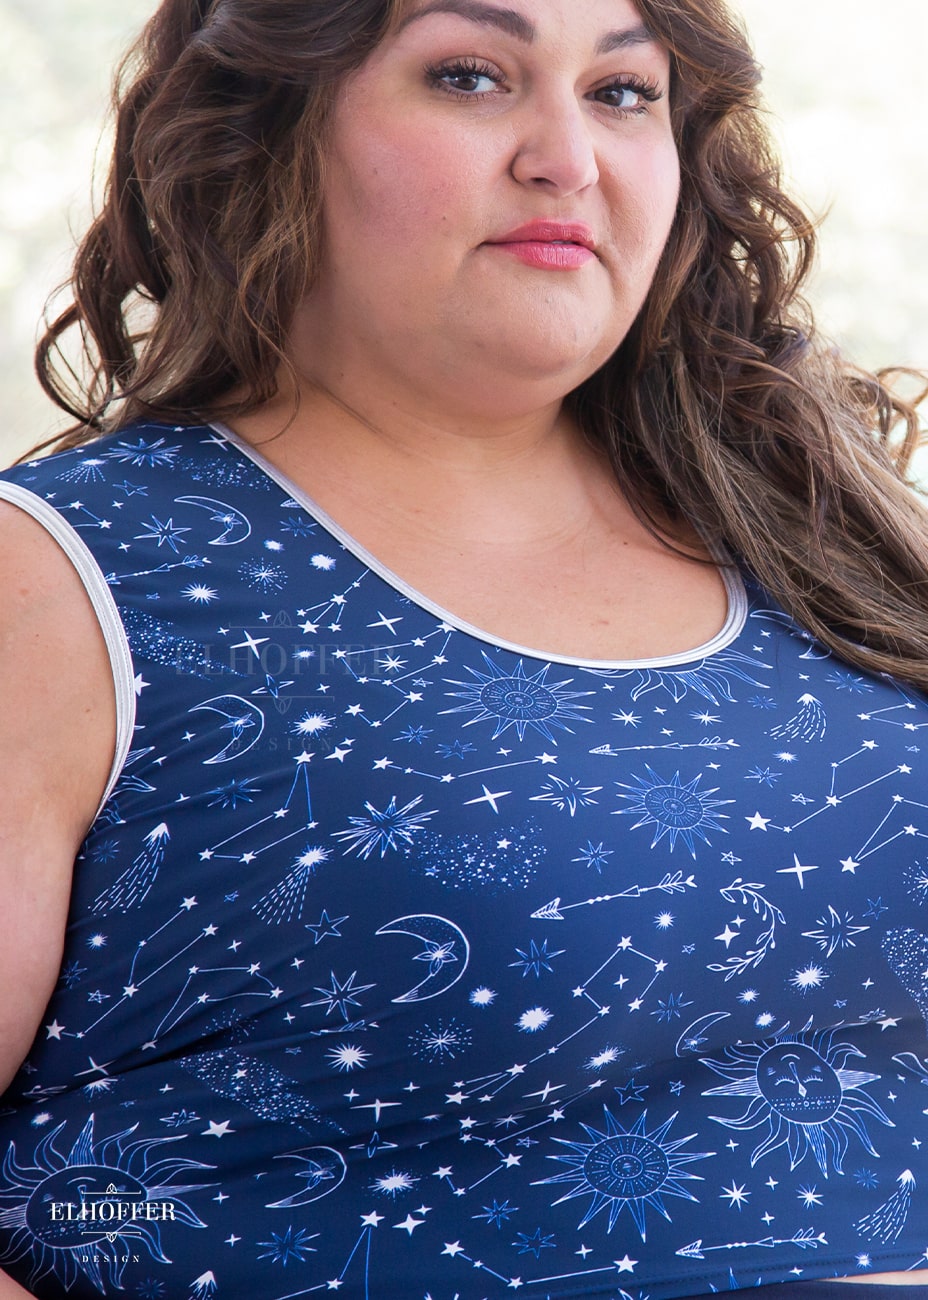 Kristen, a size 3XL olive skinned model with long brown highlighted hair, is wearing a low scoop neckline sleeveless crop top with silver metallic foldover binding at the neck and armholes, wide shoulder straps, fitted throughout the body, and ending at the natural waist in our star crossed lovers print. The Star-Crossed Lovers print is a celestial inspired pattern featuring a navy base and white stars, constellations, sunds, moons, and other small details scattered across the repeated art.